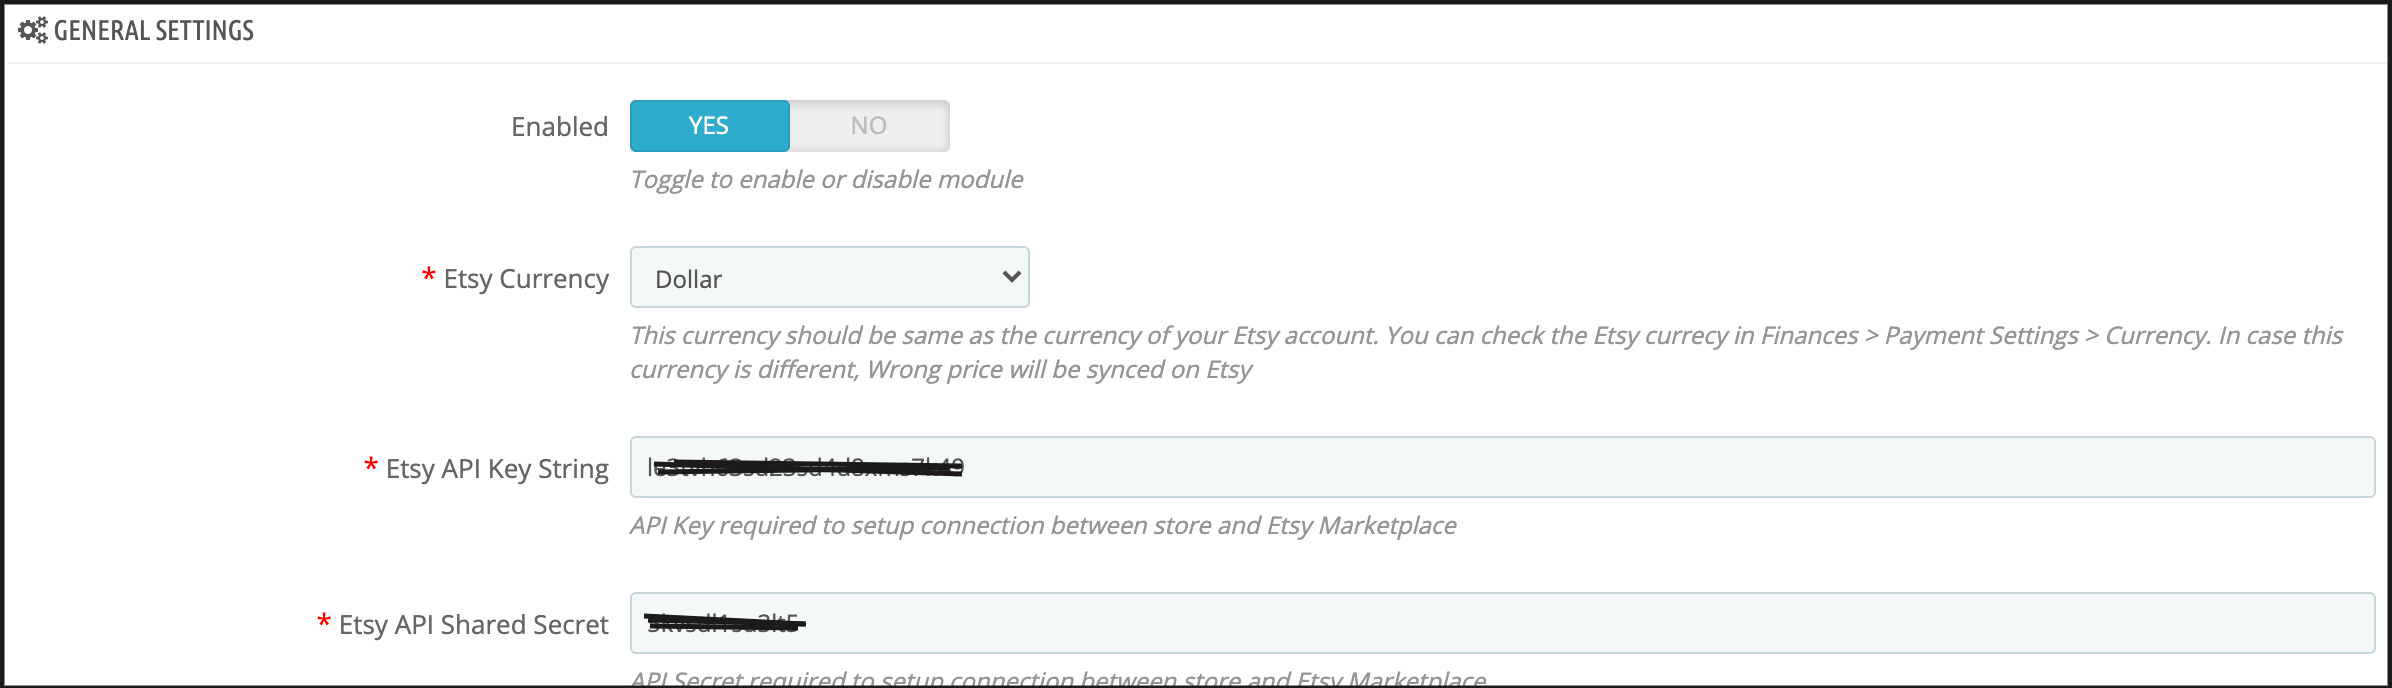 knowband-prestashop-etsy-integration-plugin-admin-interface-general-settings-connect-disconnect